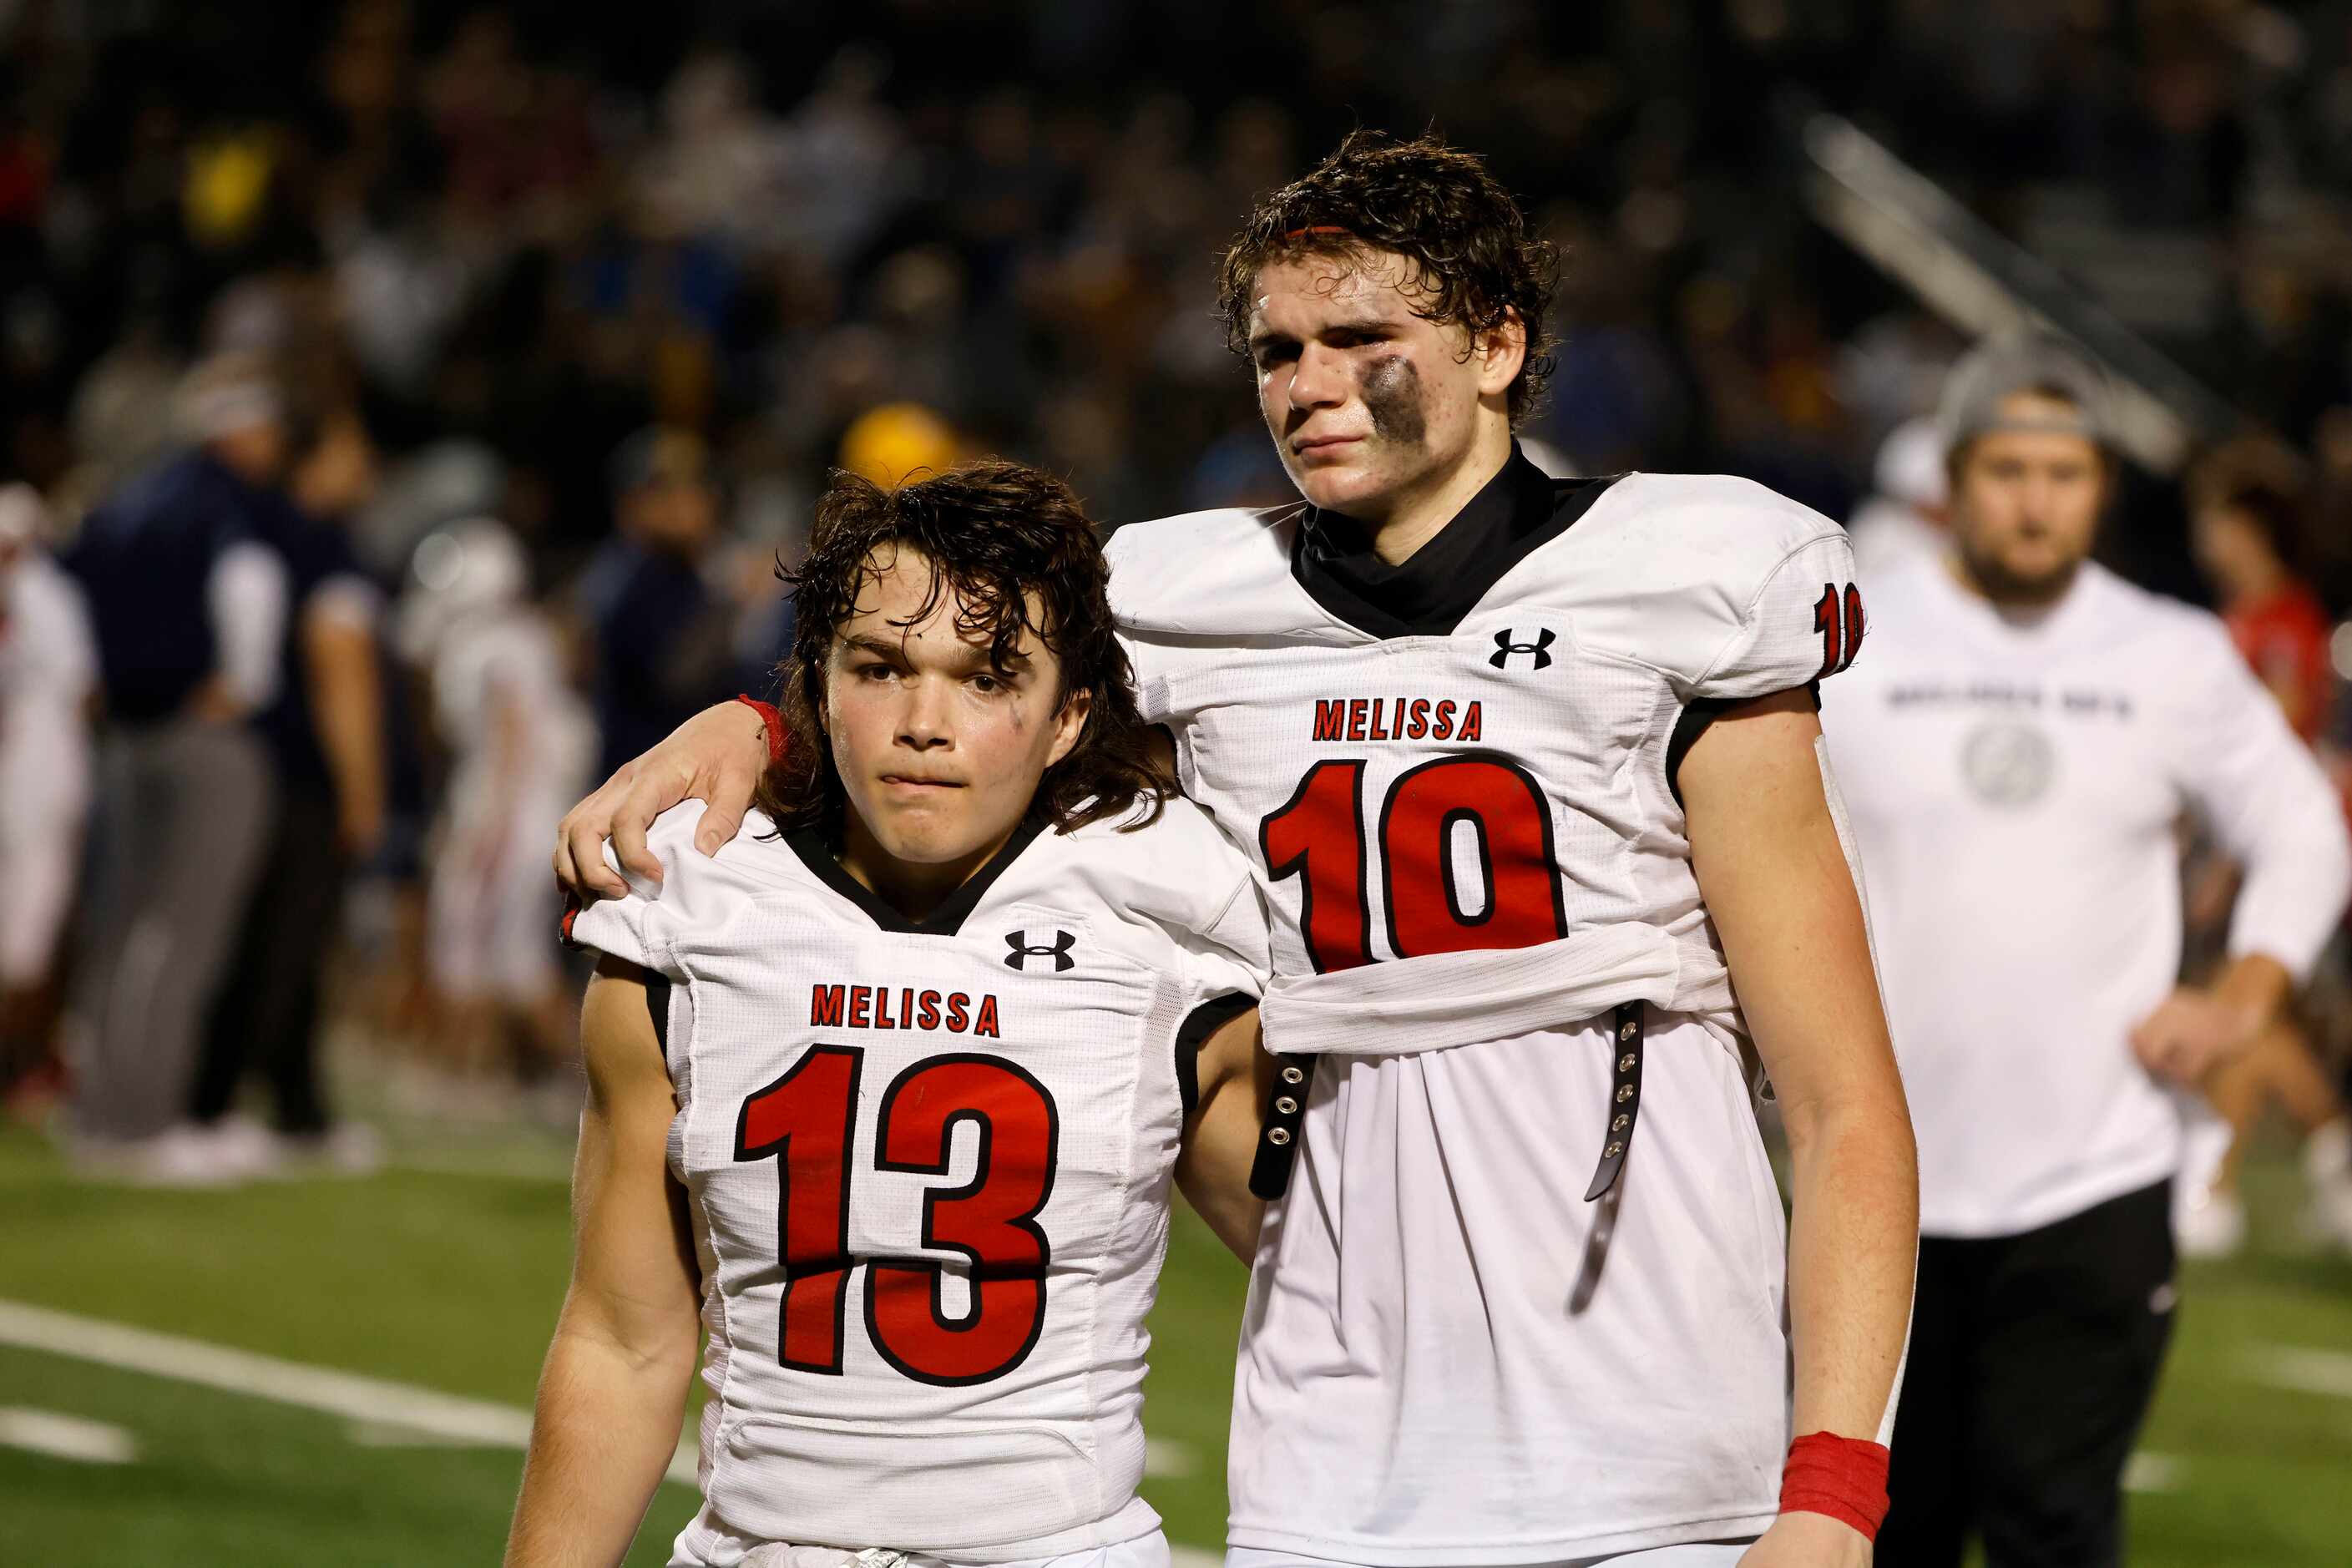 Melissa wide receivers Jacob Kusano (13) and Matthew Sanford embrace after they lost to...